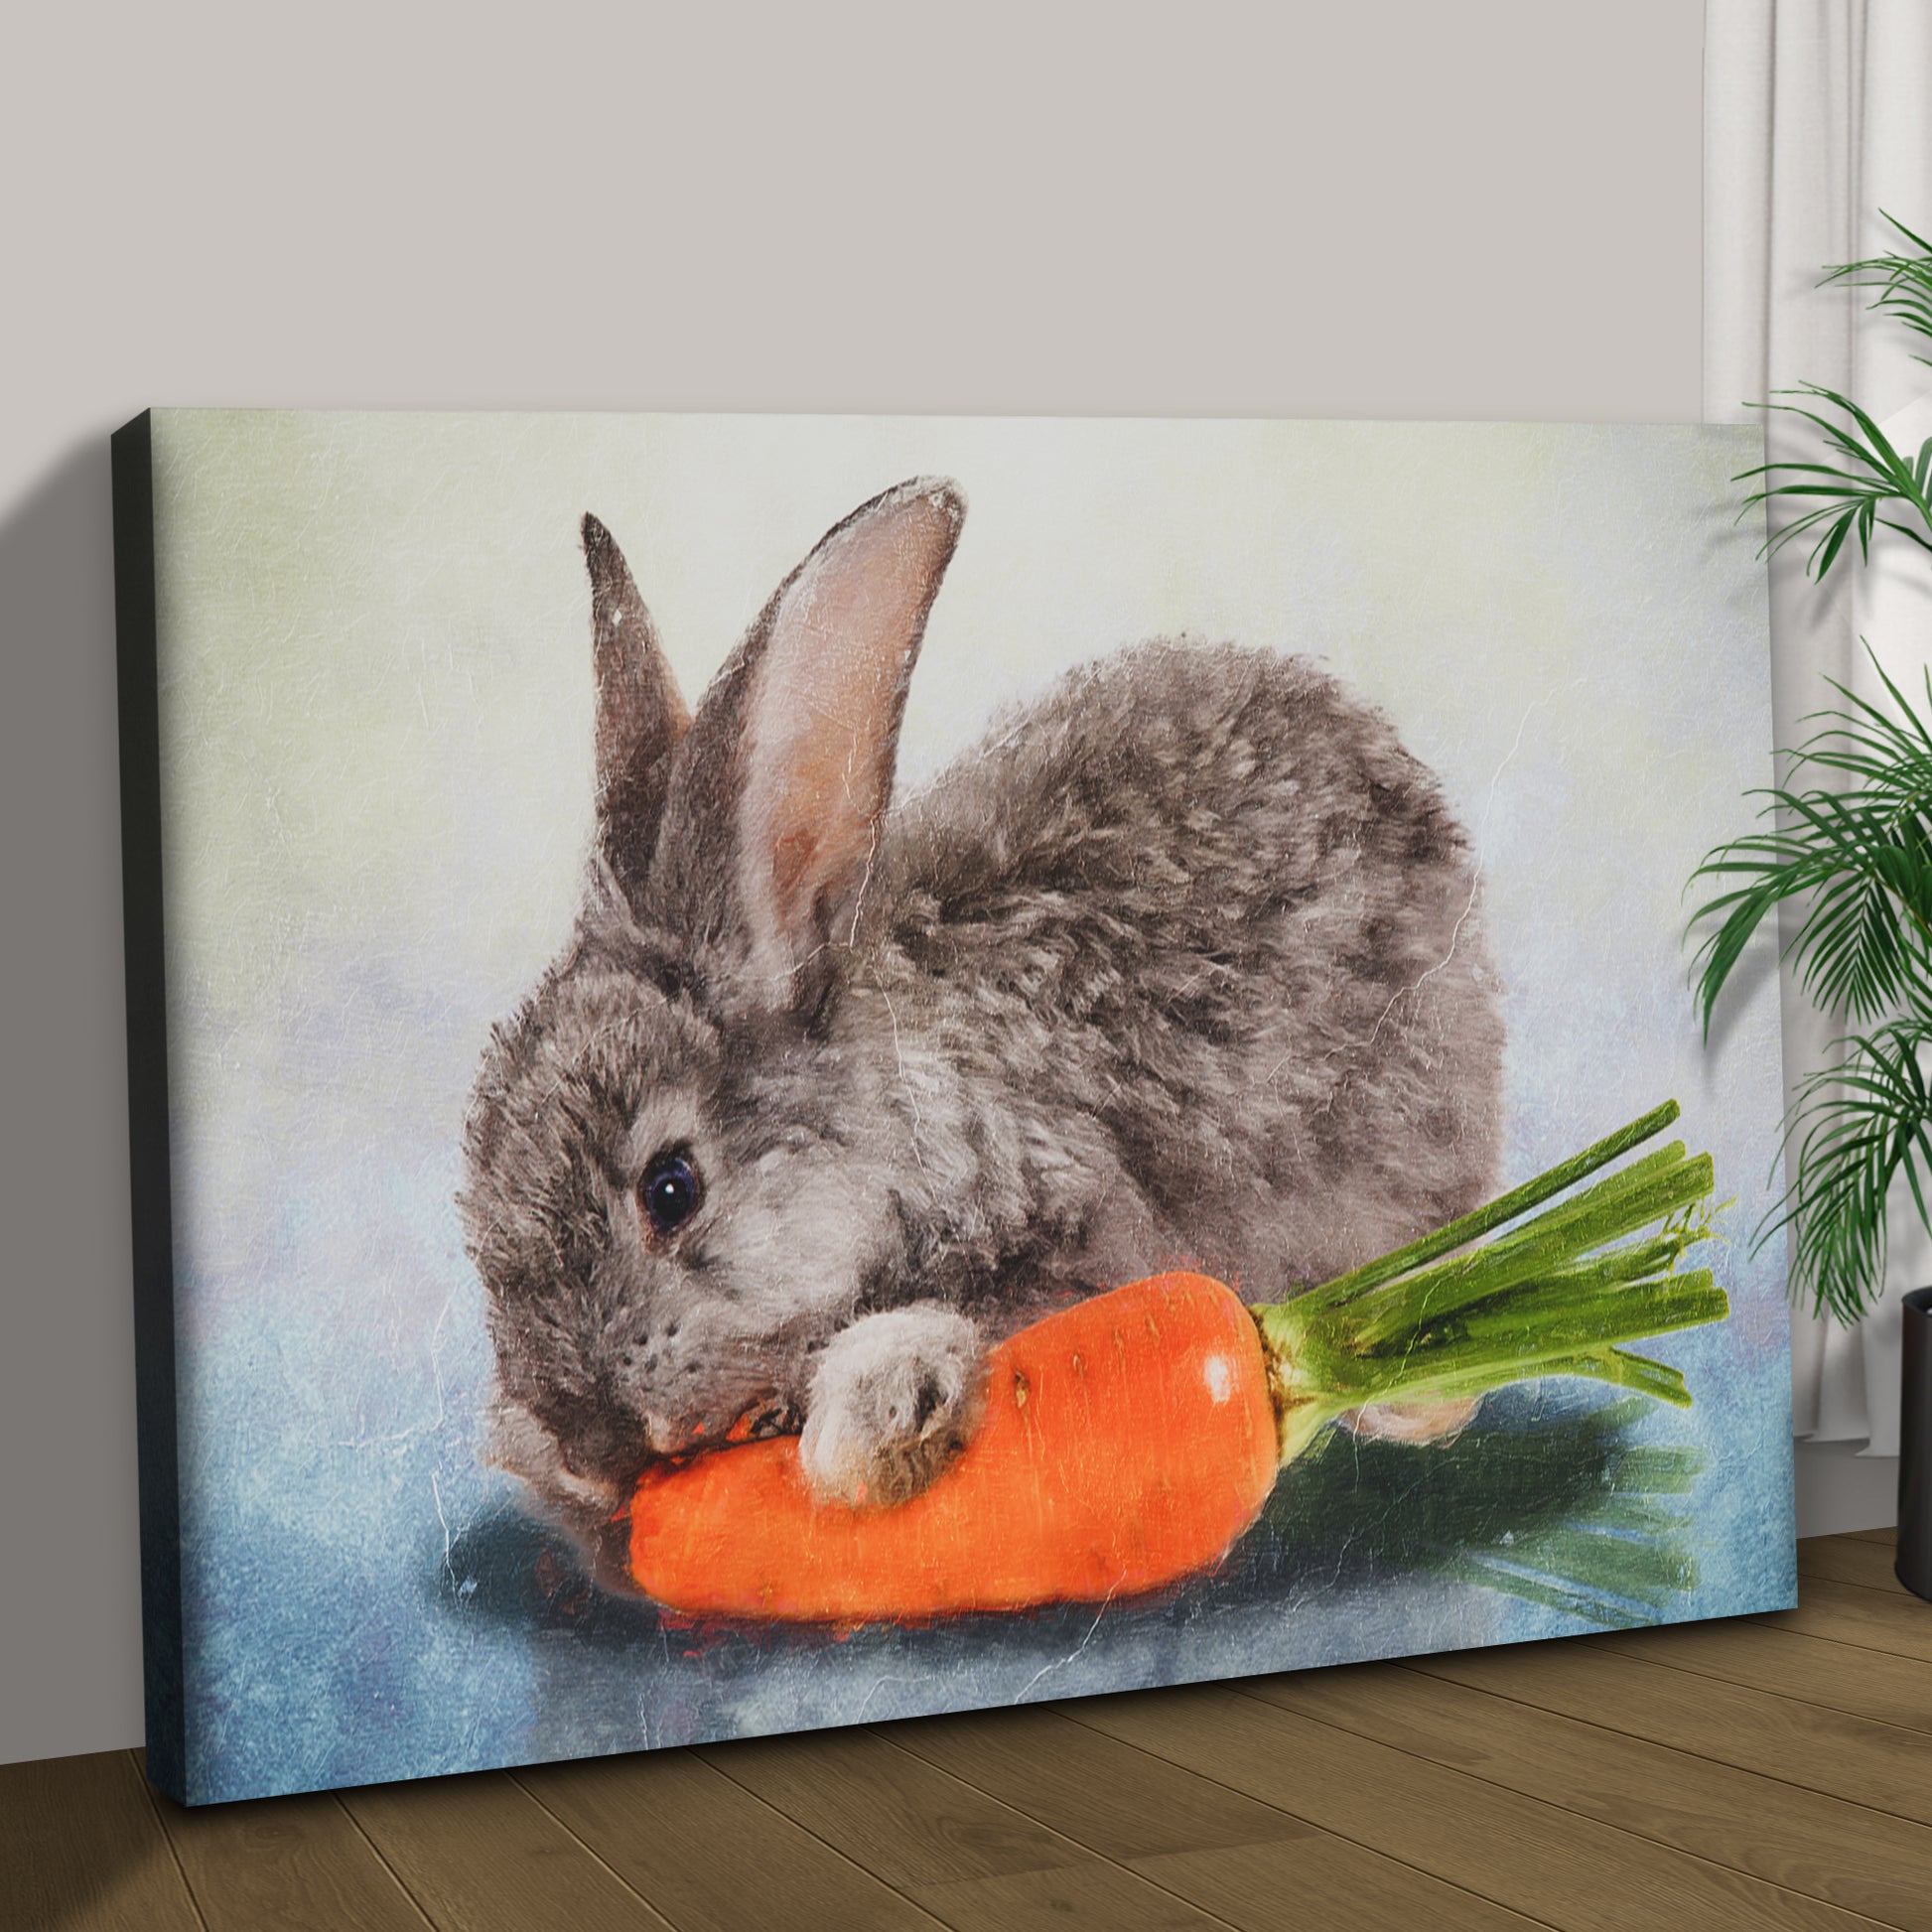 Rabbit With Carrot Oil Paint Canvas Wall Art Style 2 - Image by Tailored Canvases